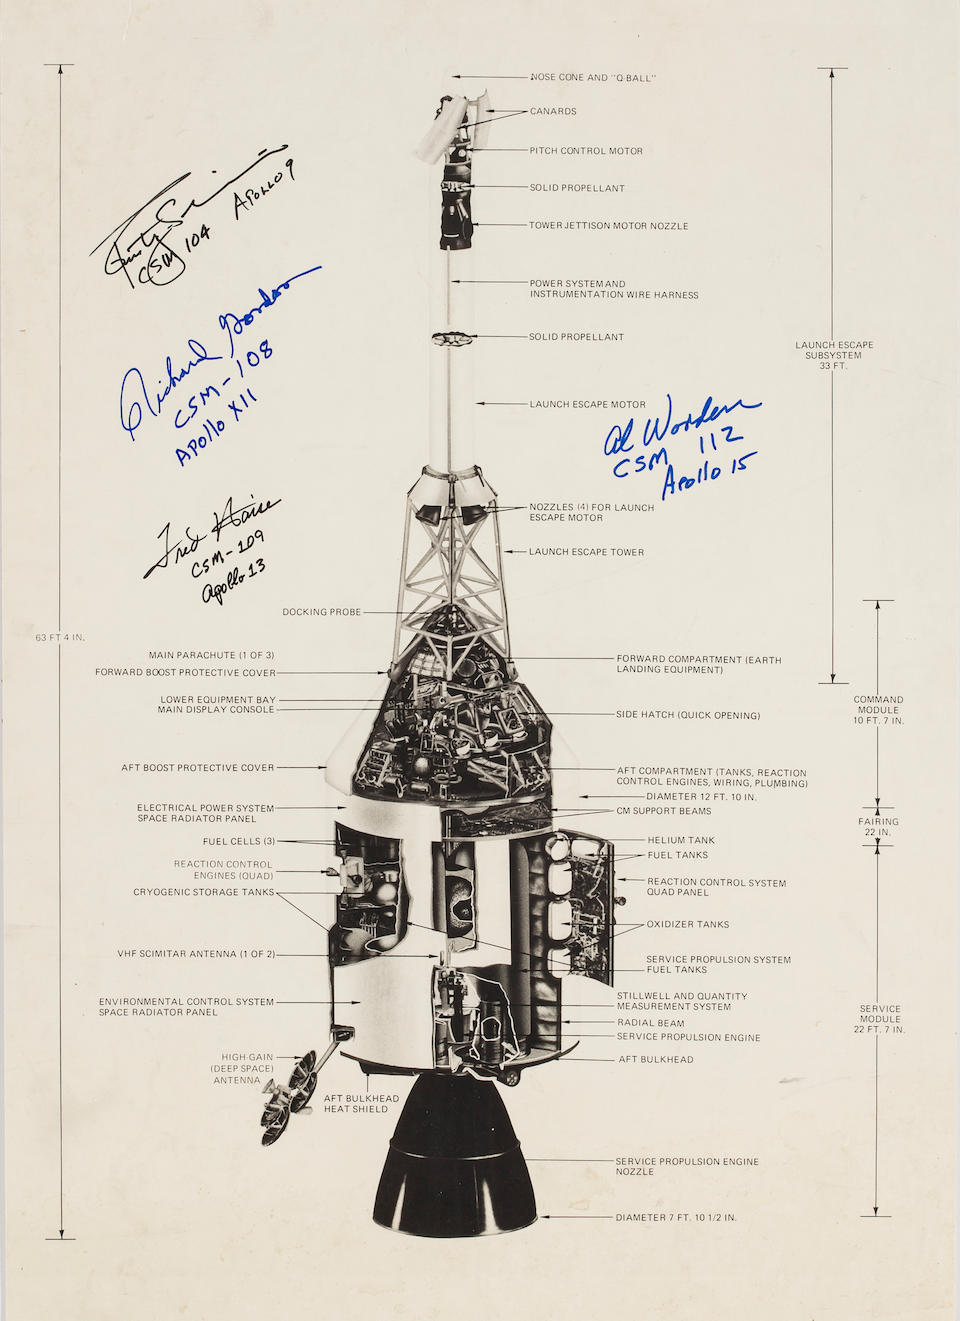 LARGE APOLLO SPACECRAFT DIAGRAM, SIGNED Halftone diagram of the Apollo Command and Service Modules (CSM) including the Launch Escape SubSystem (LES).